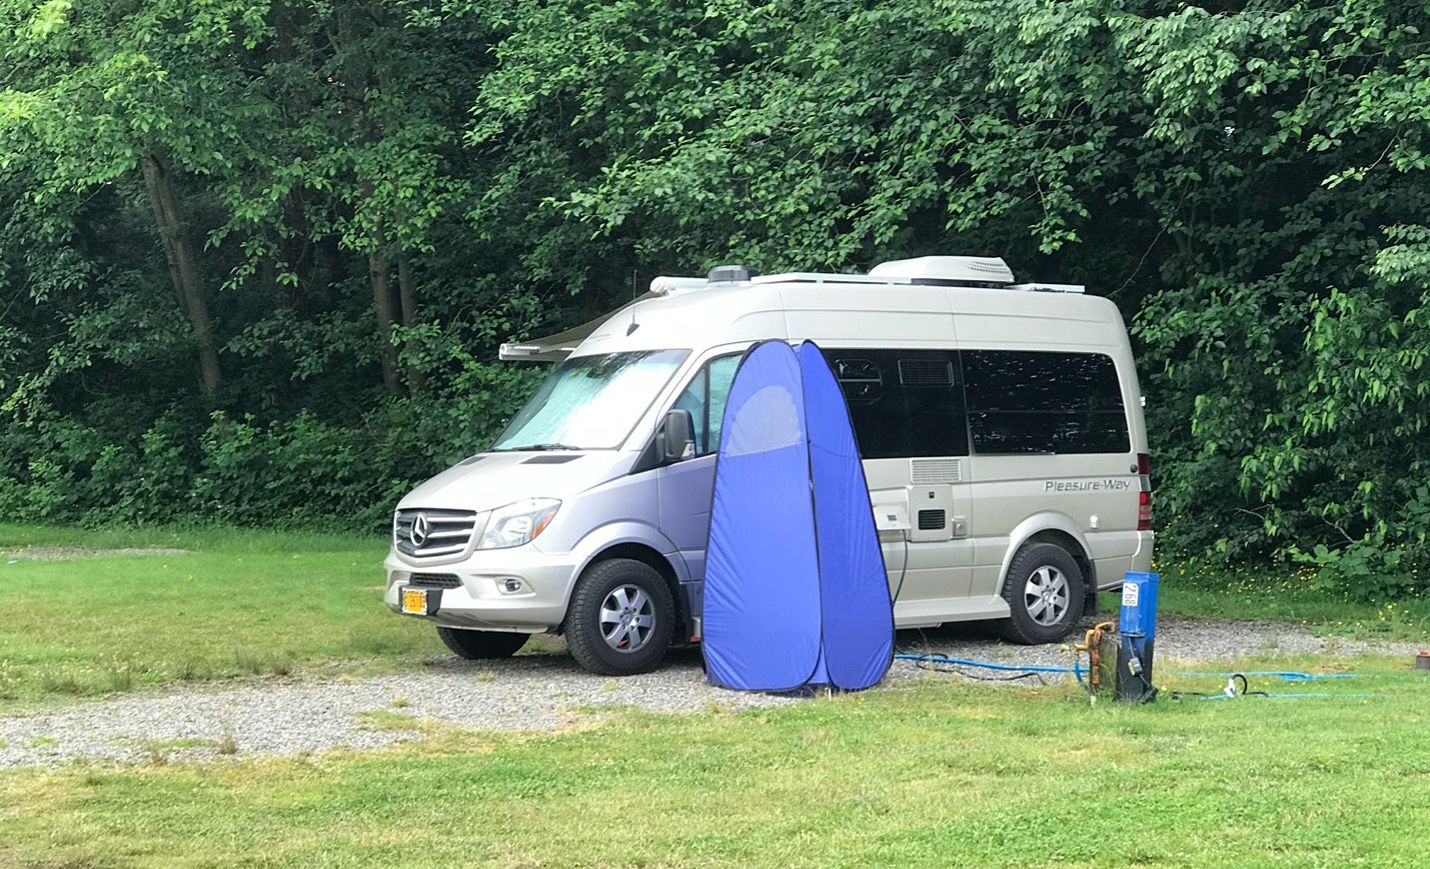 Silver RV van with a portable outdoor shower parked in a campground.